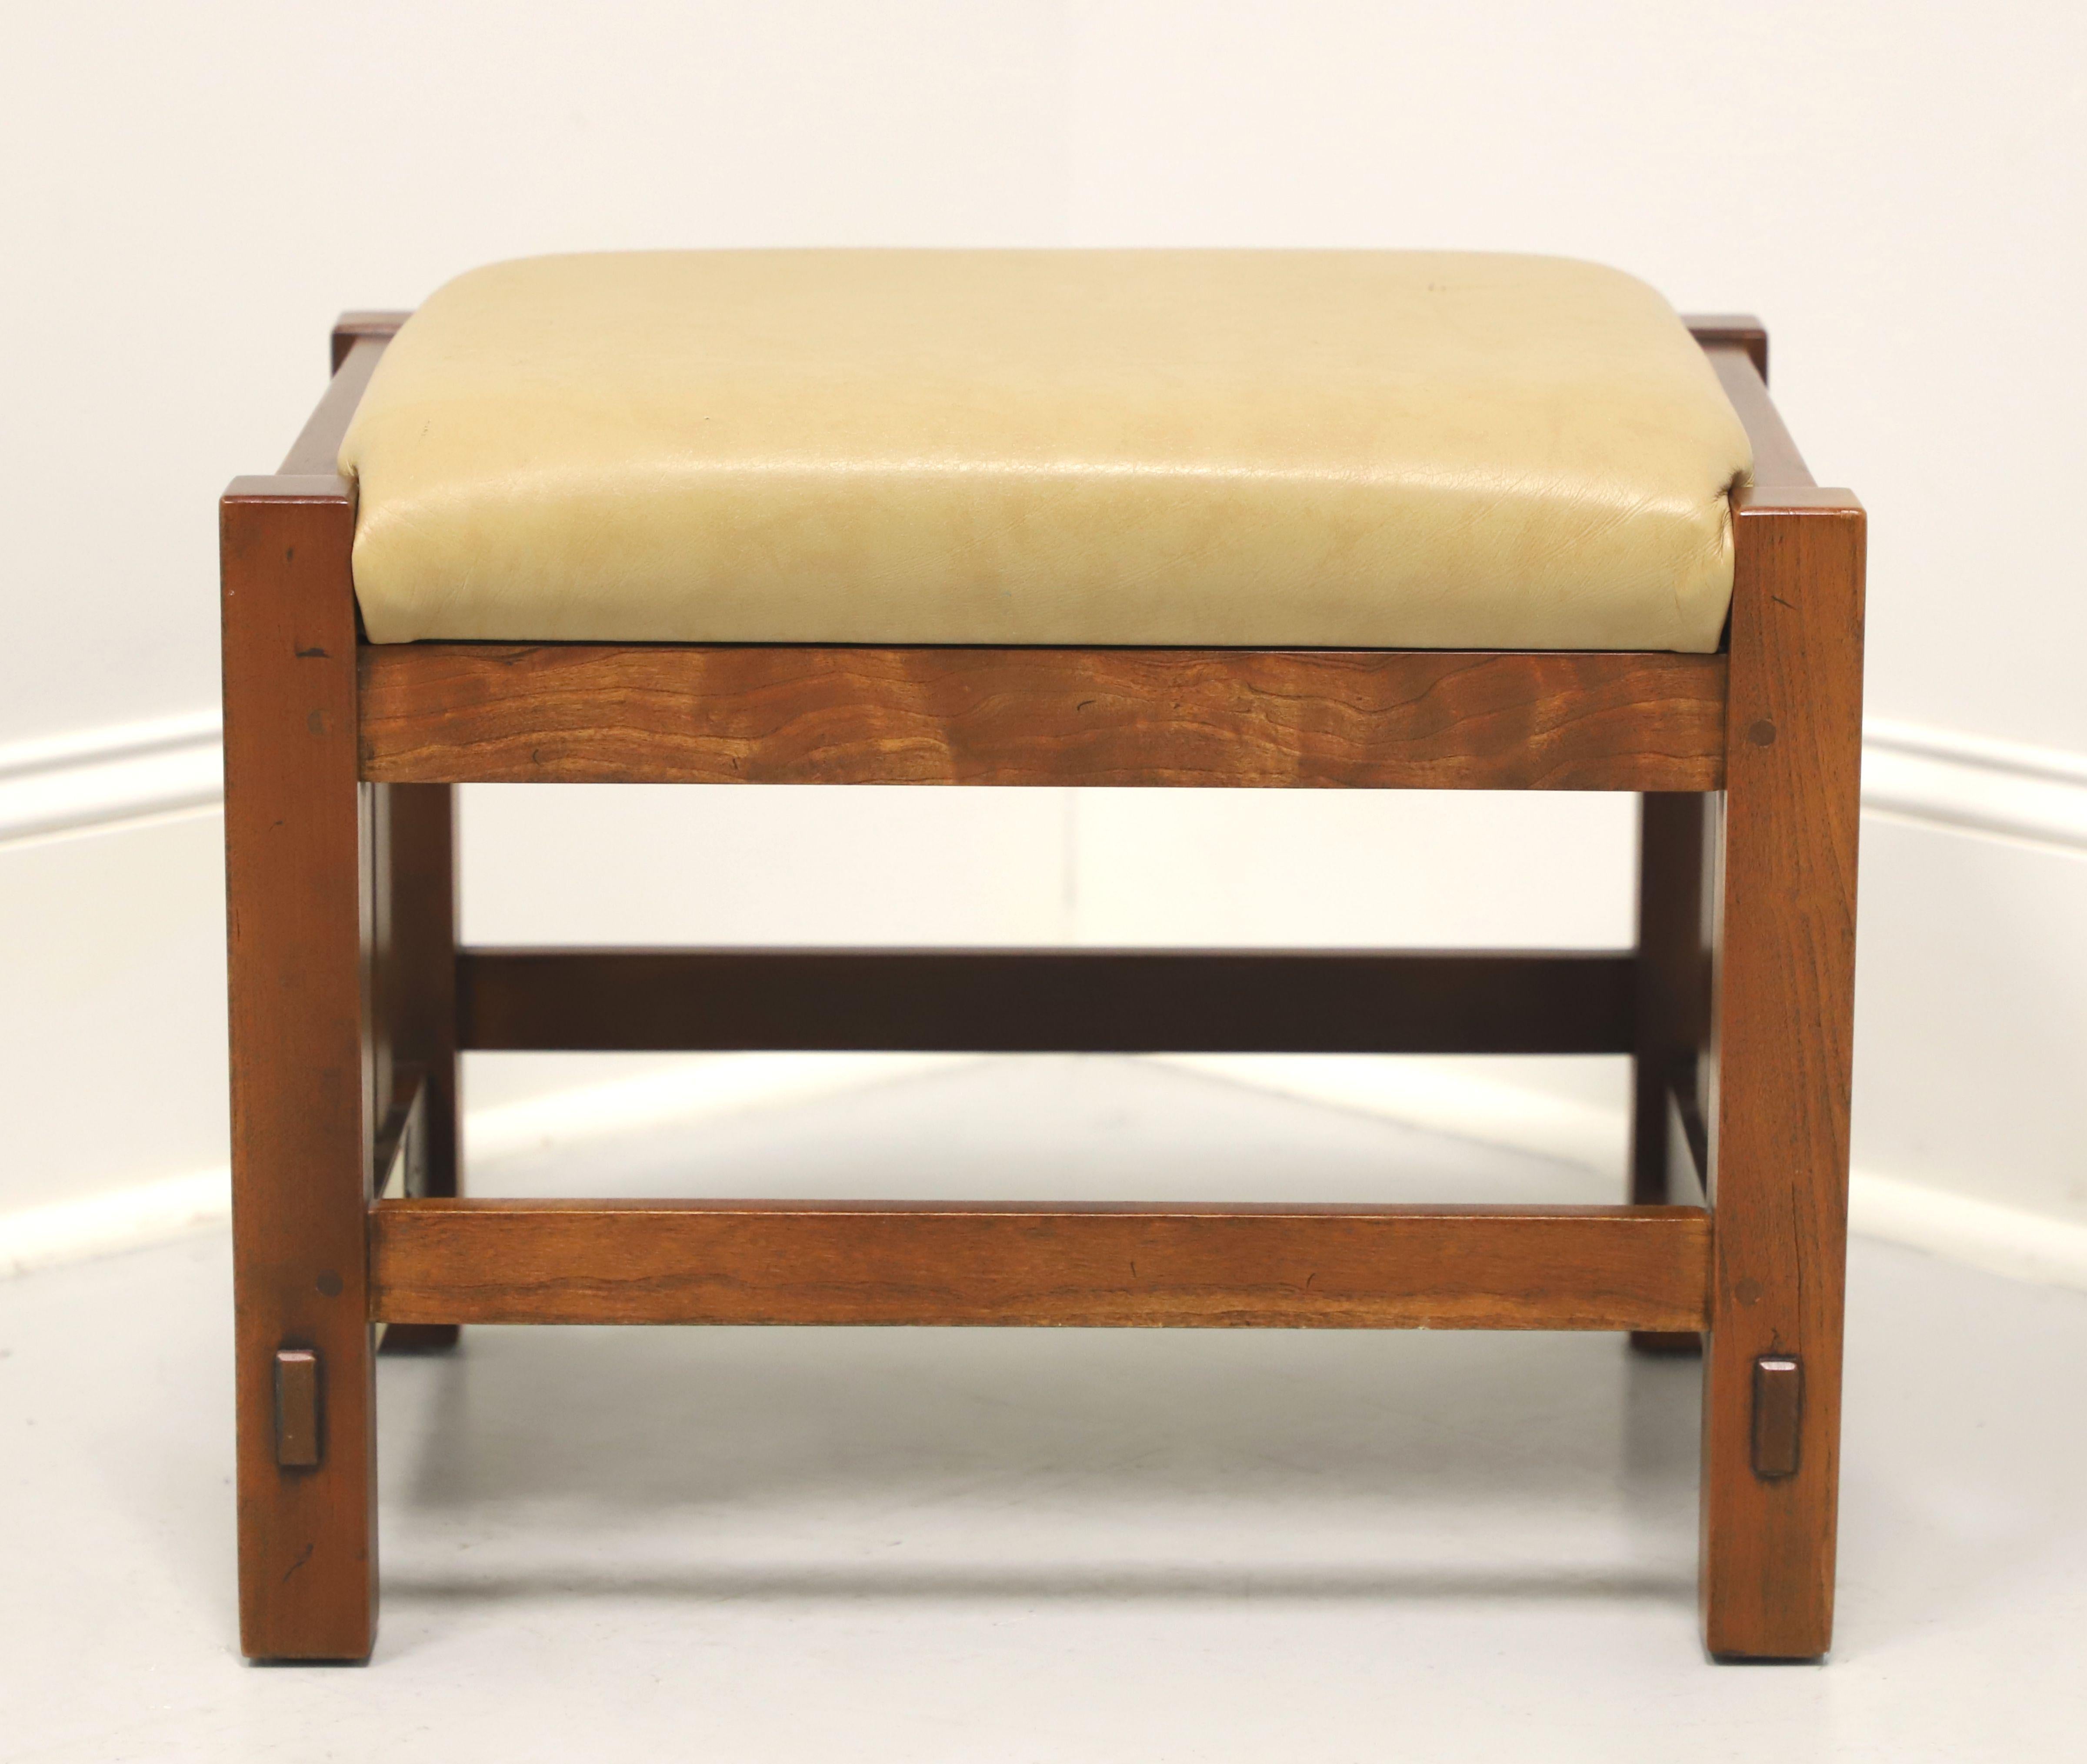 American STICKLEY Mission Cherry & Leather Footstool 91-495 - A